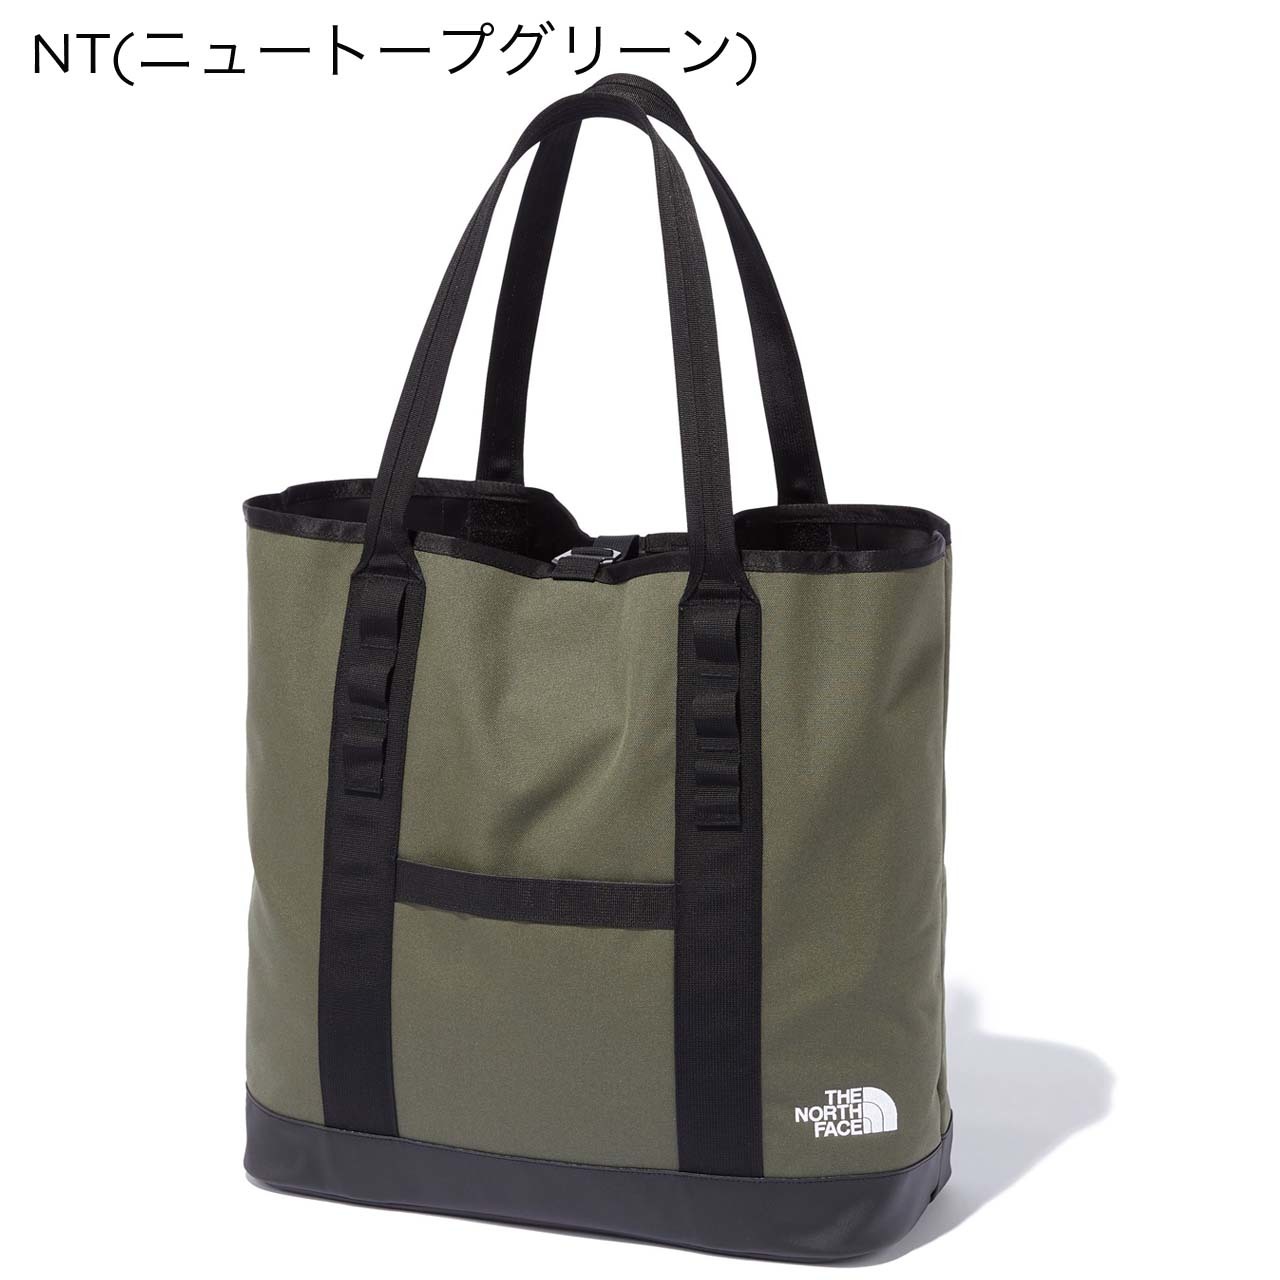 THE NORTH FACE [ザ・ノース・フェイス] Fieludens Gear Tote S [NM82202]_f0051306_09275040.jpg